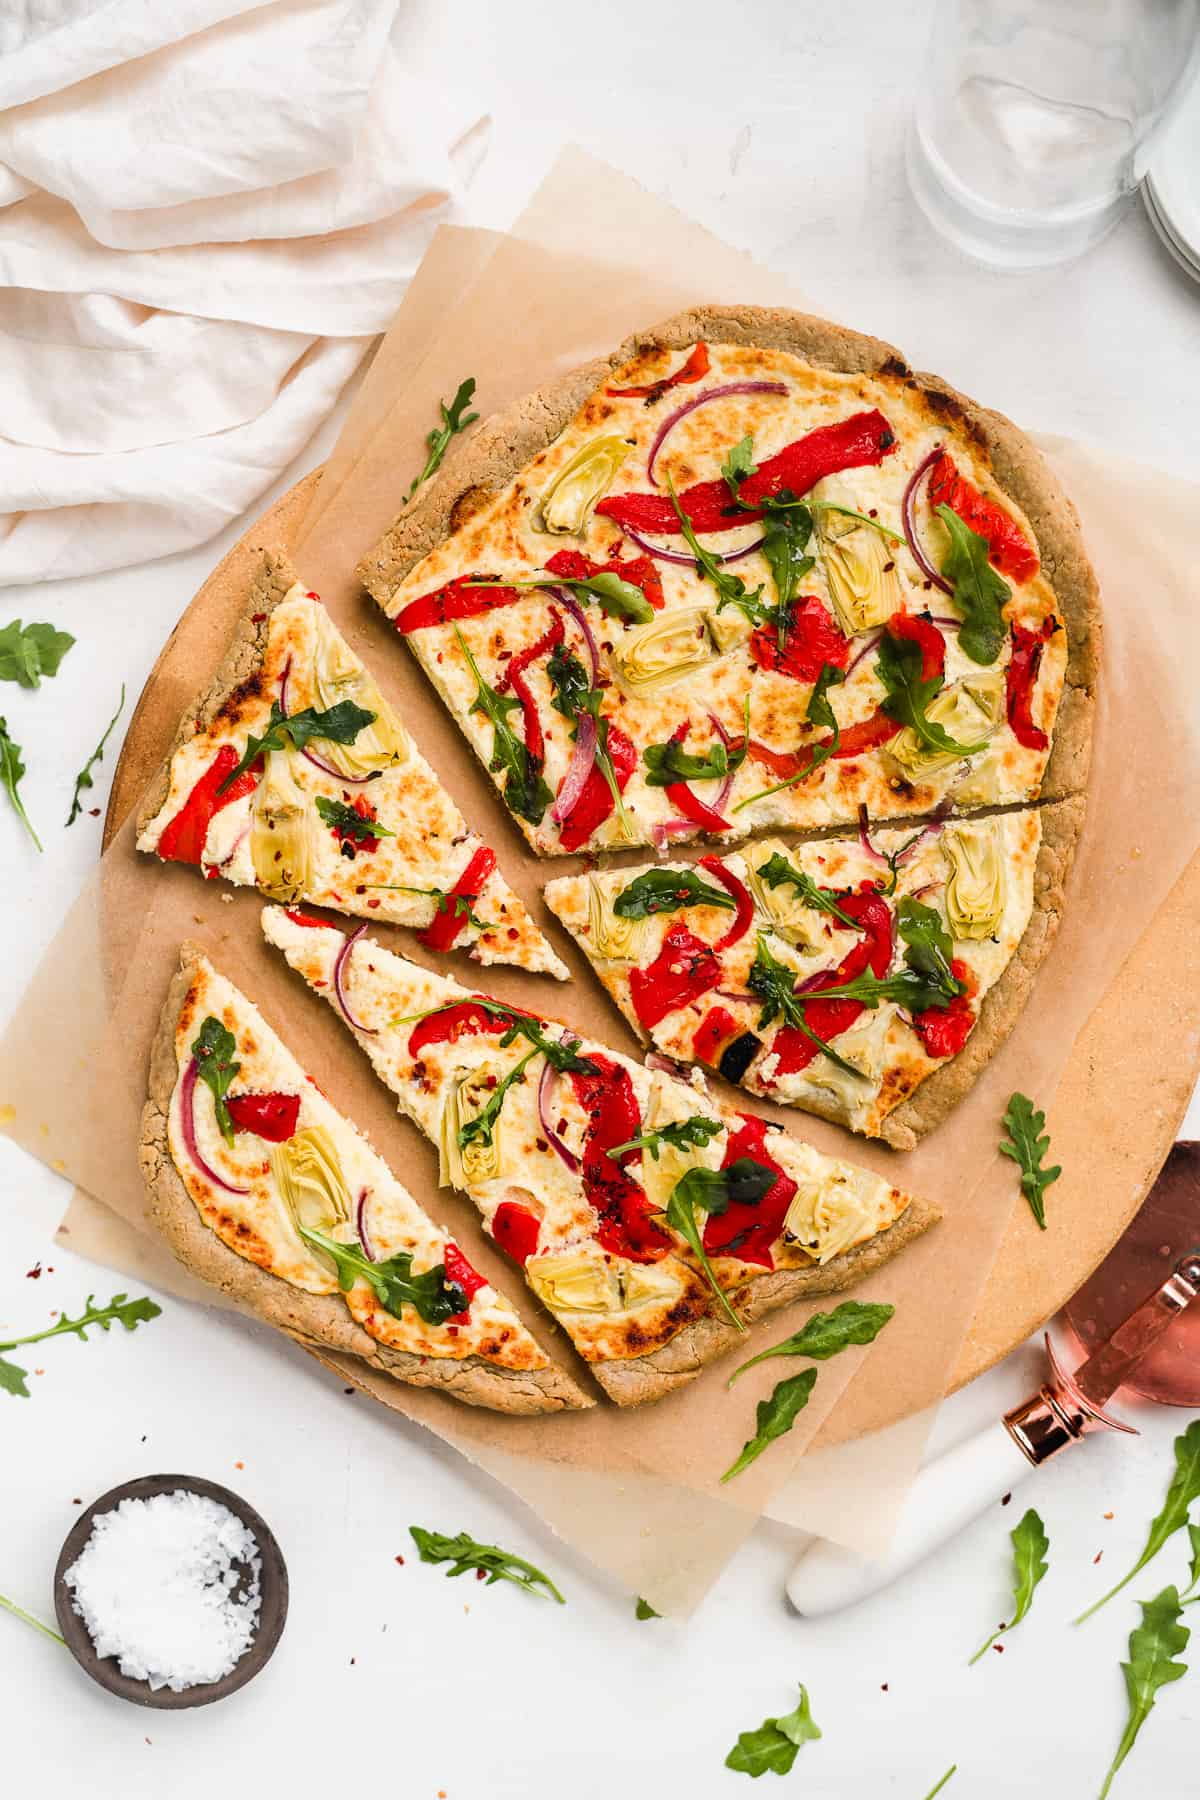 Sliced pizza on a pizza stone topped with red peppers and green herbs.